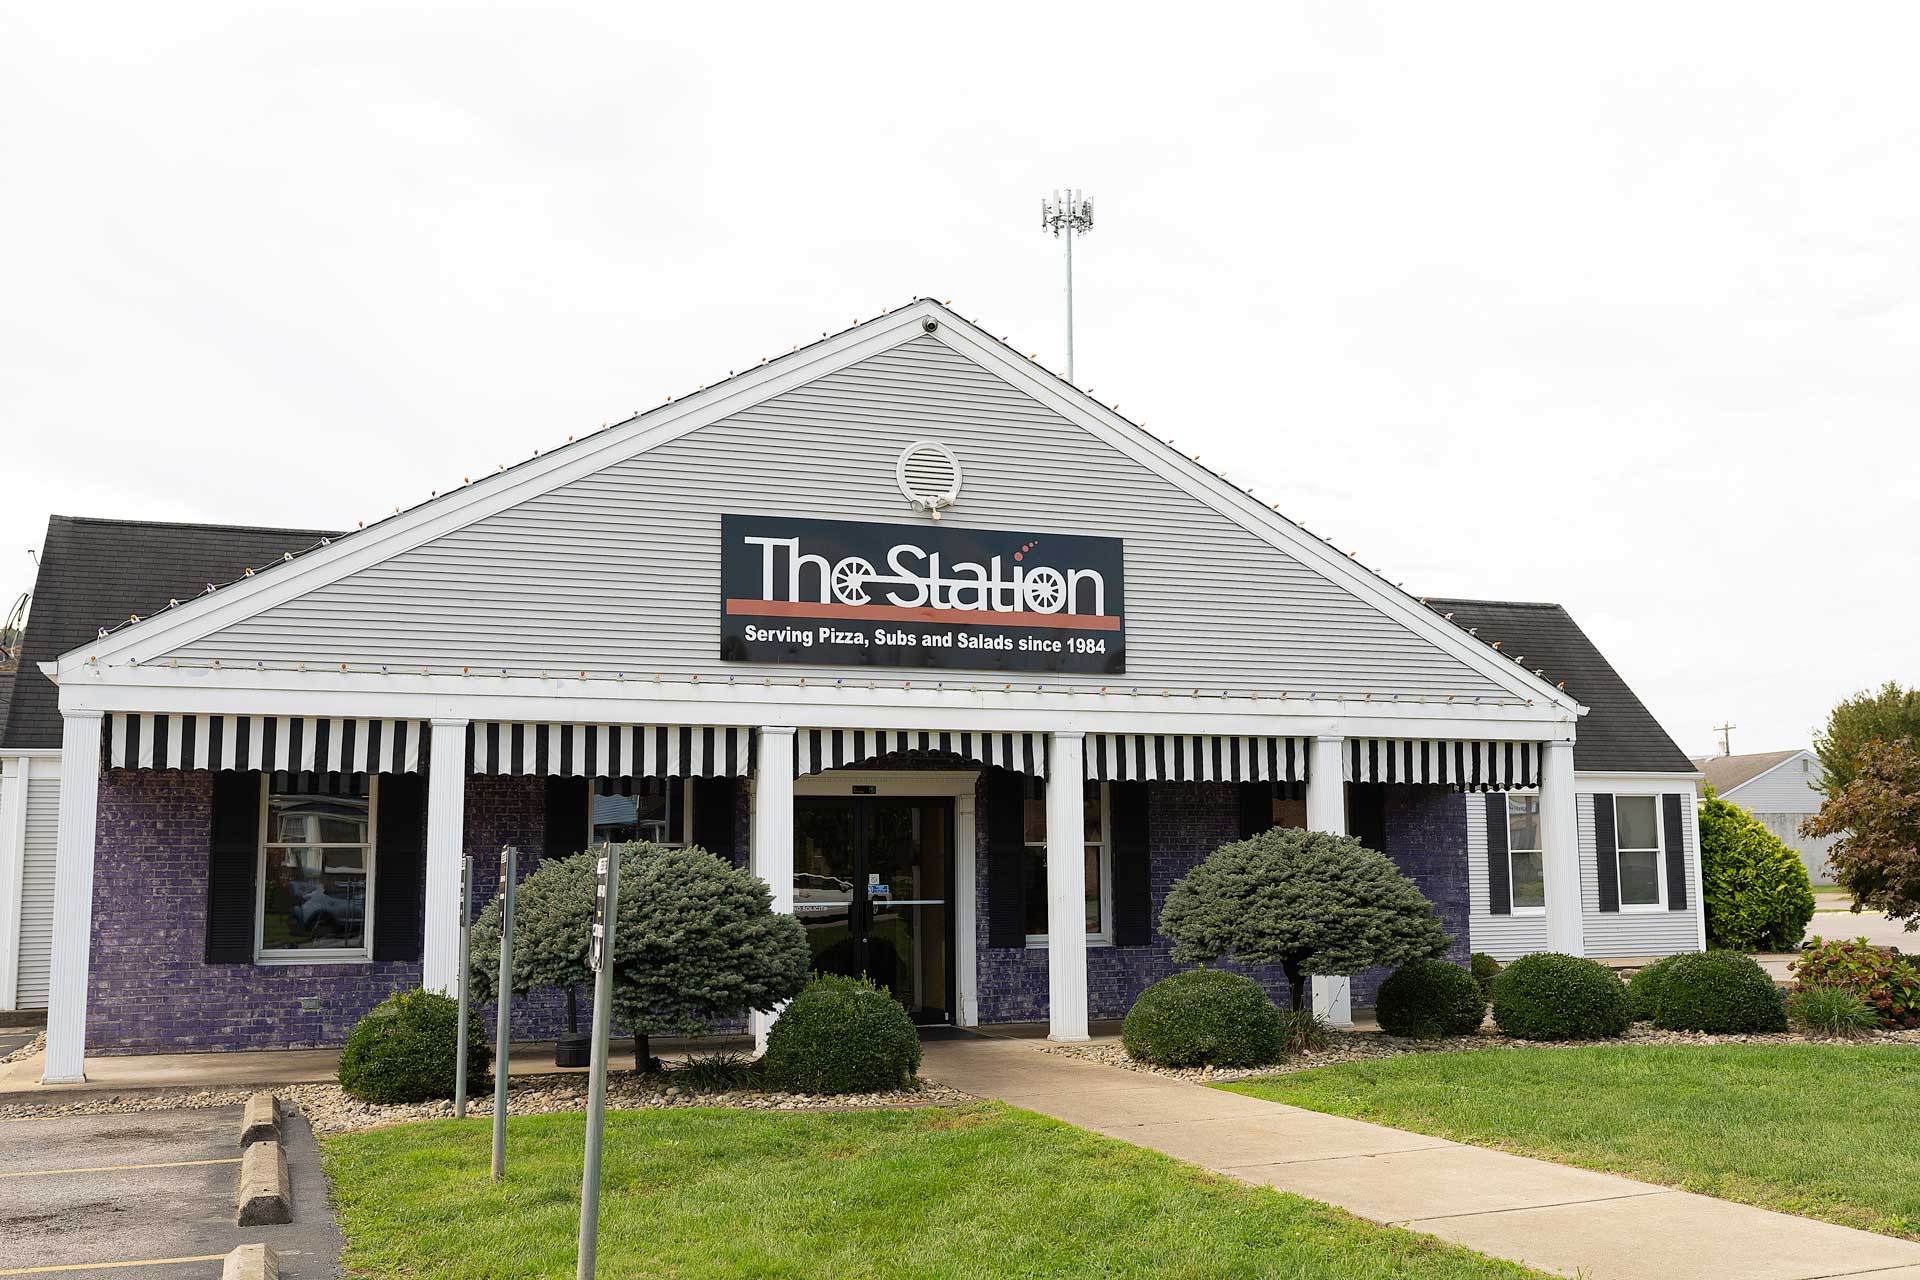 The Pizza Station - Serving Northwest West Virginia, St Marys WV and Ohio